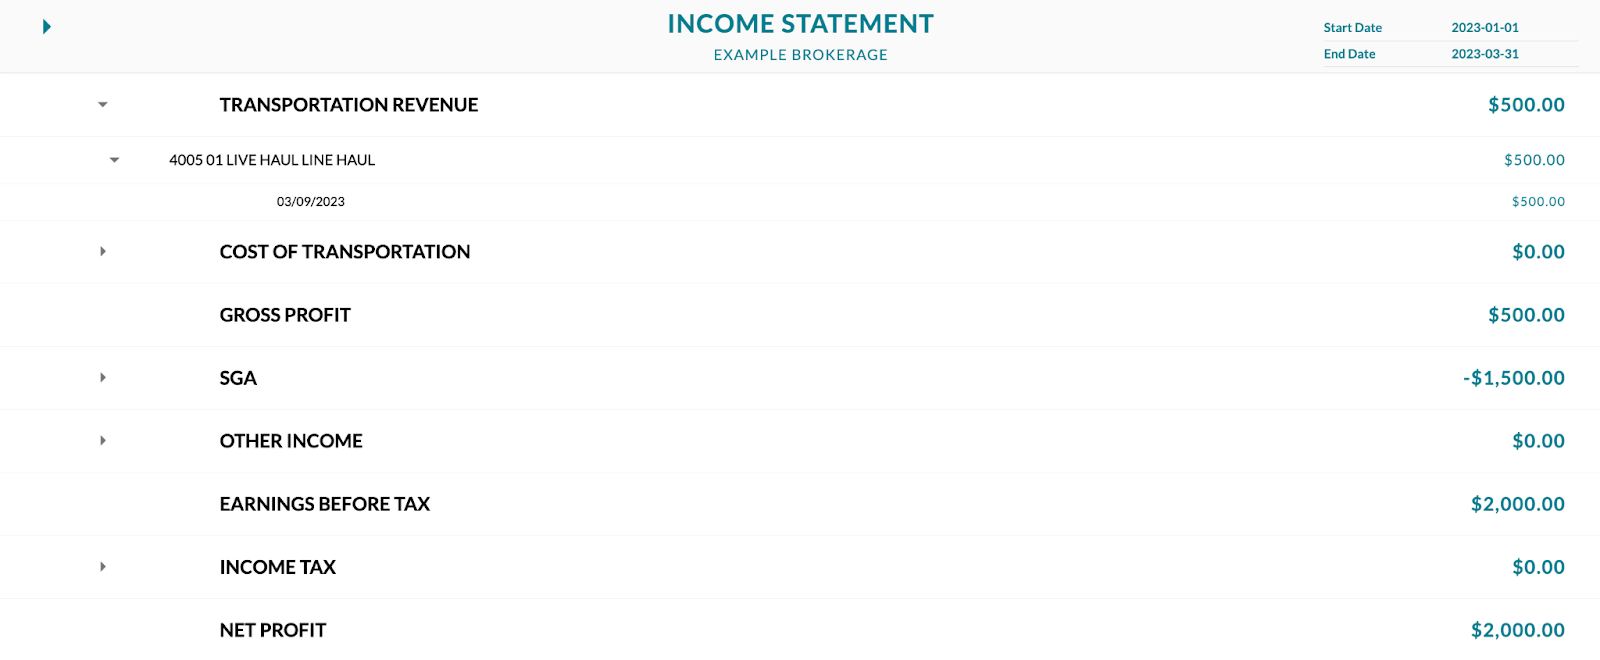 income_statement_3.png